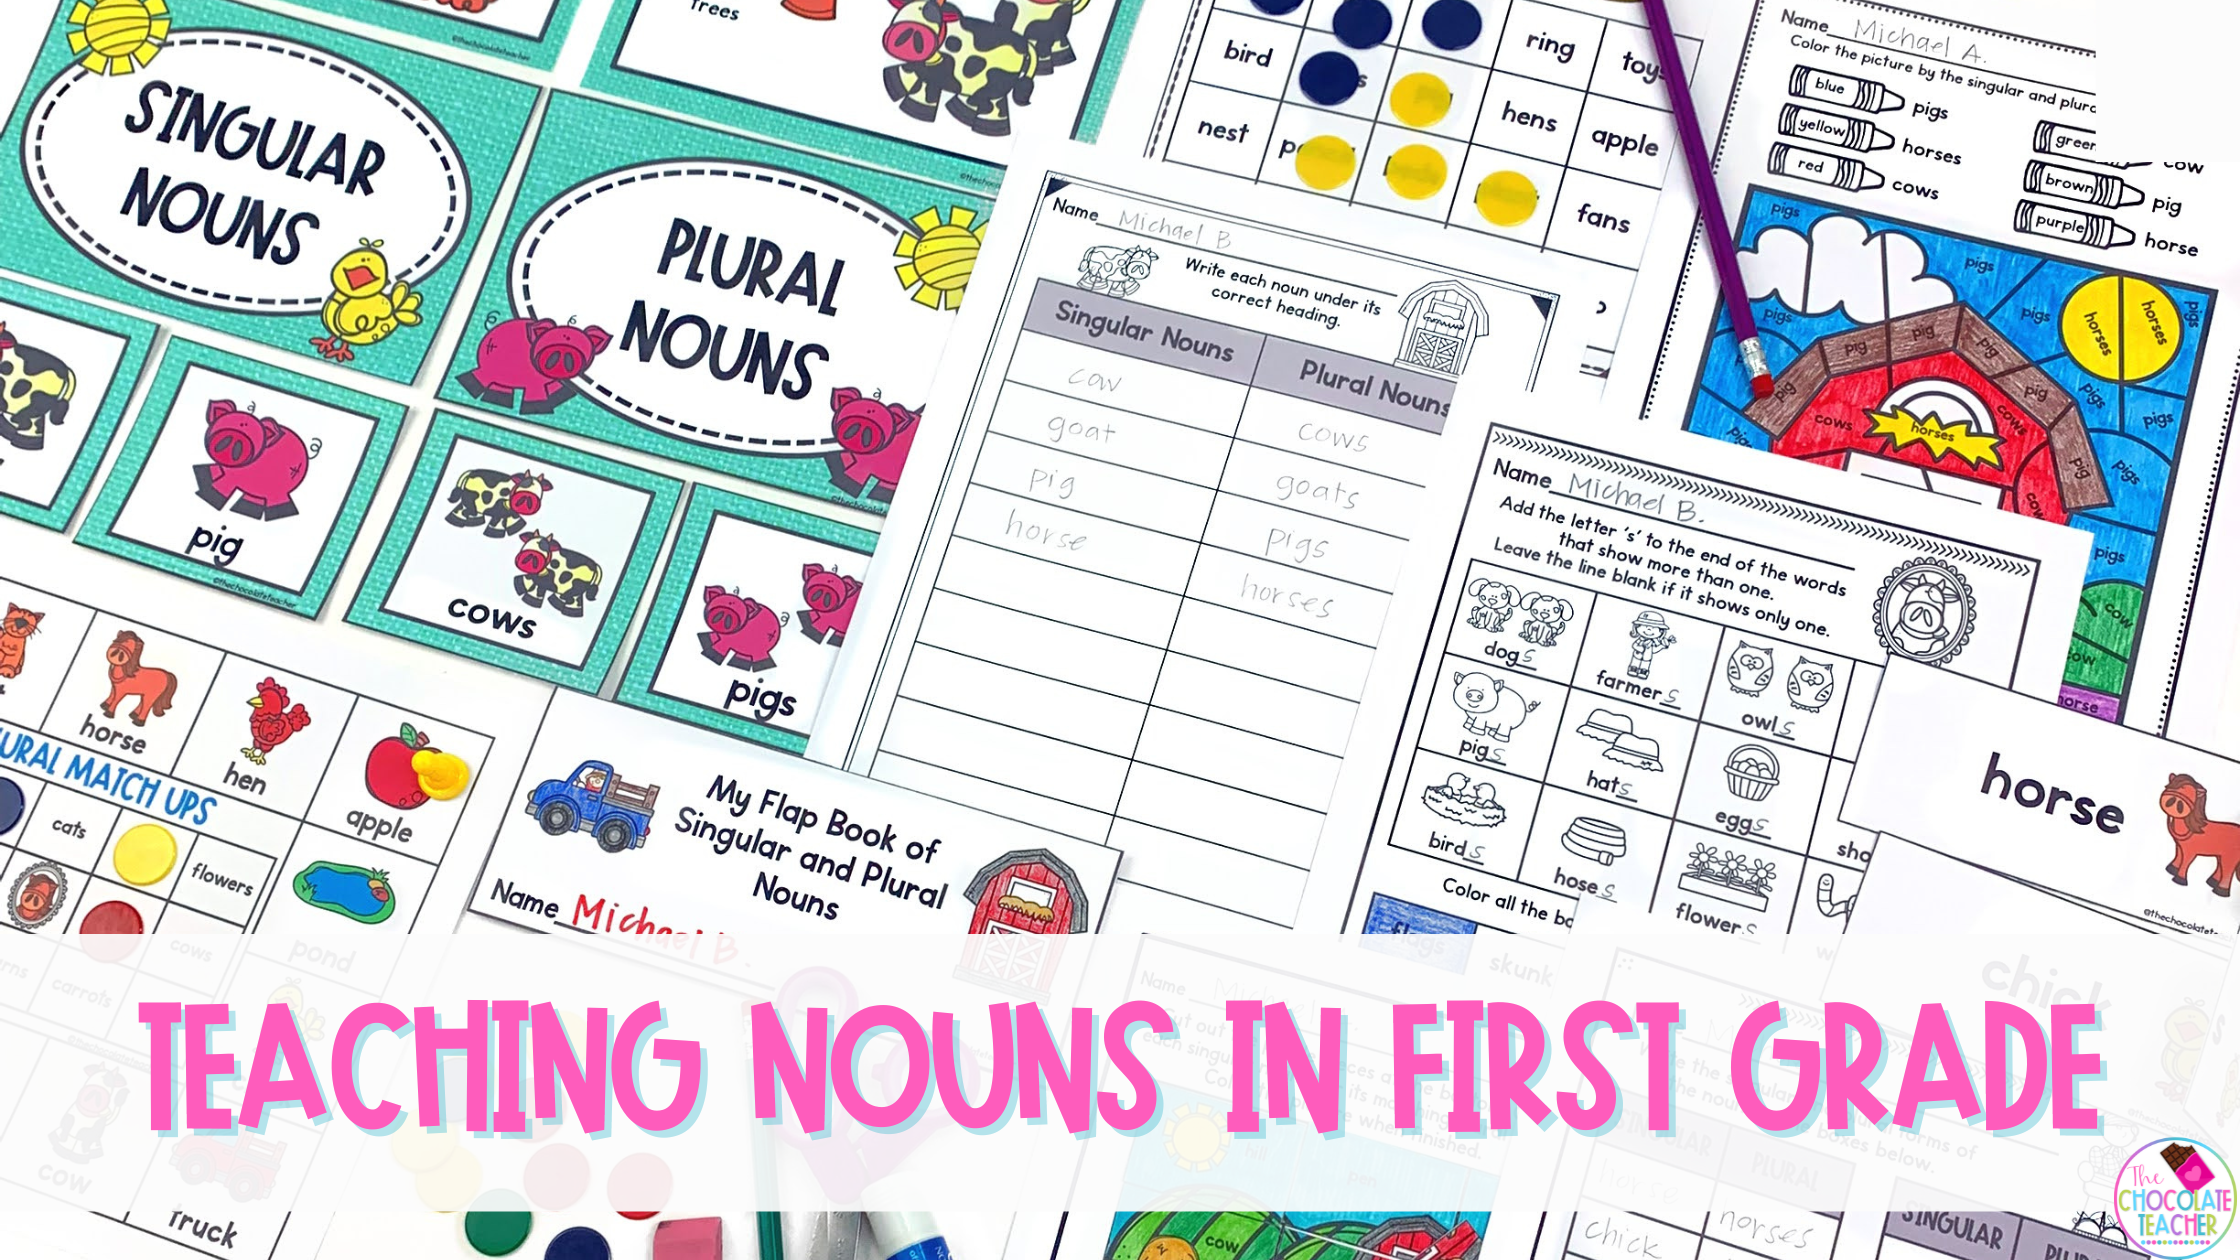 Teaching nouns in first grade is not only easy but super fun for your students with these incredible resources you can use all year long.